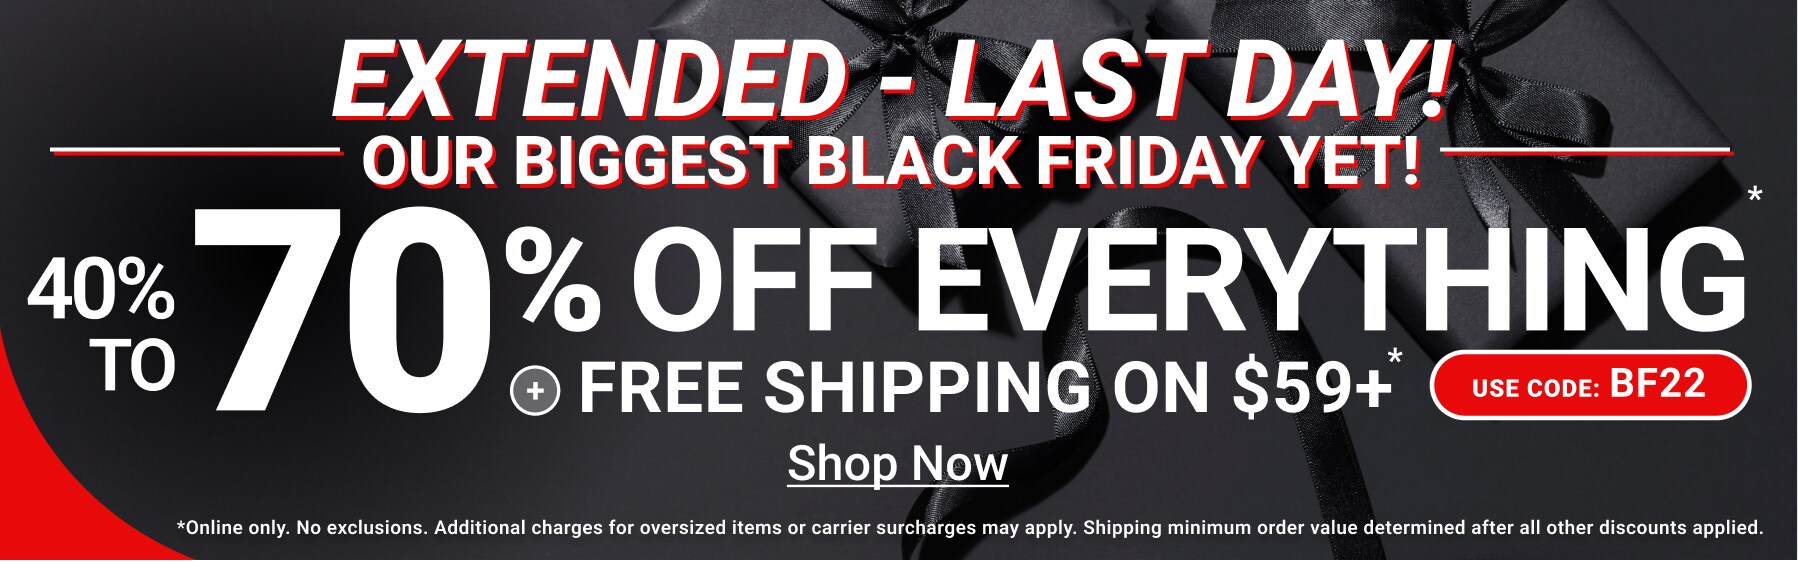 40-70% Off Everything plus Free Shipping On $59+ - Shop Now